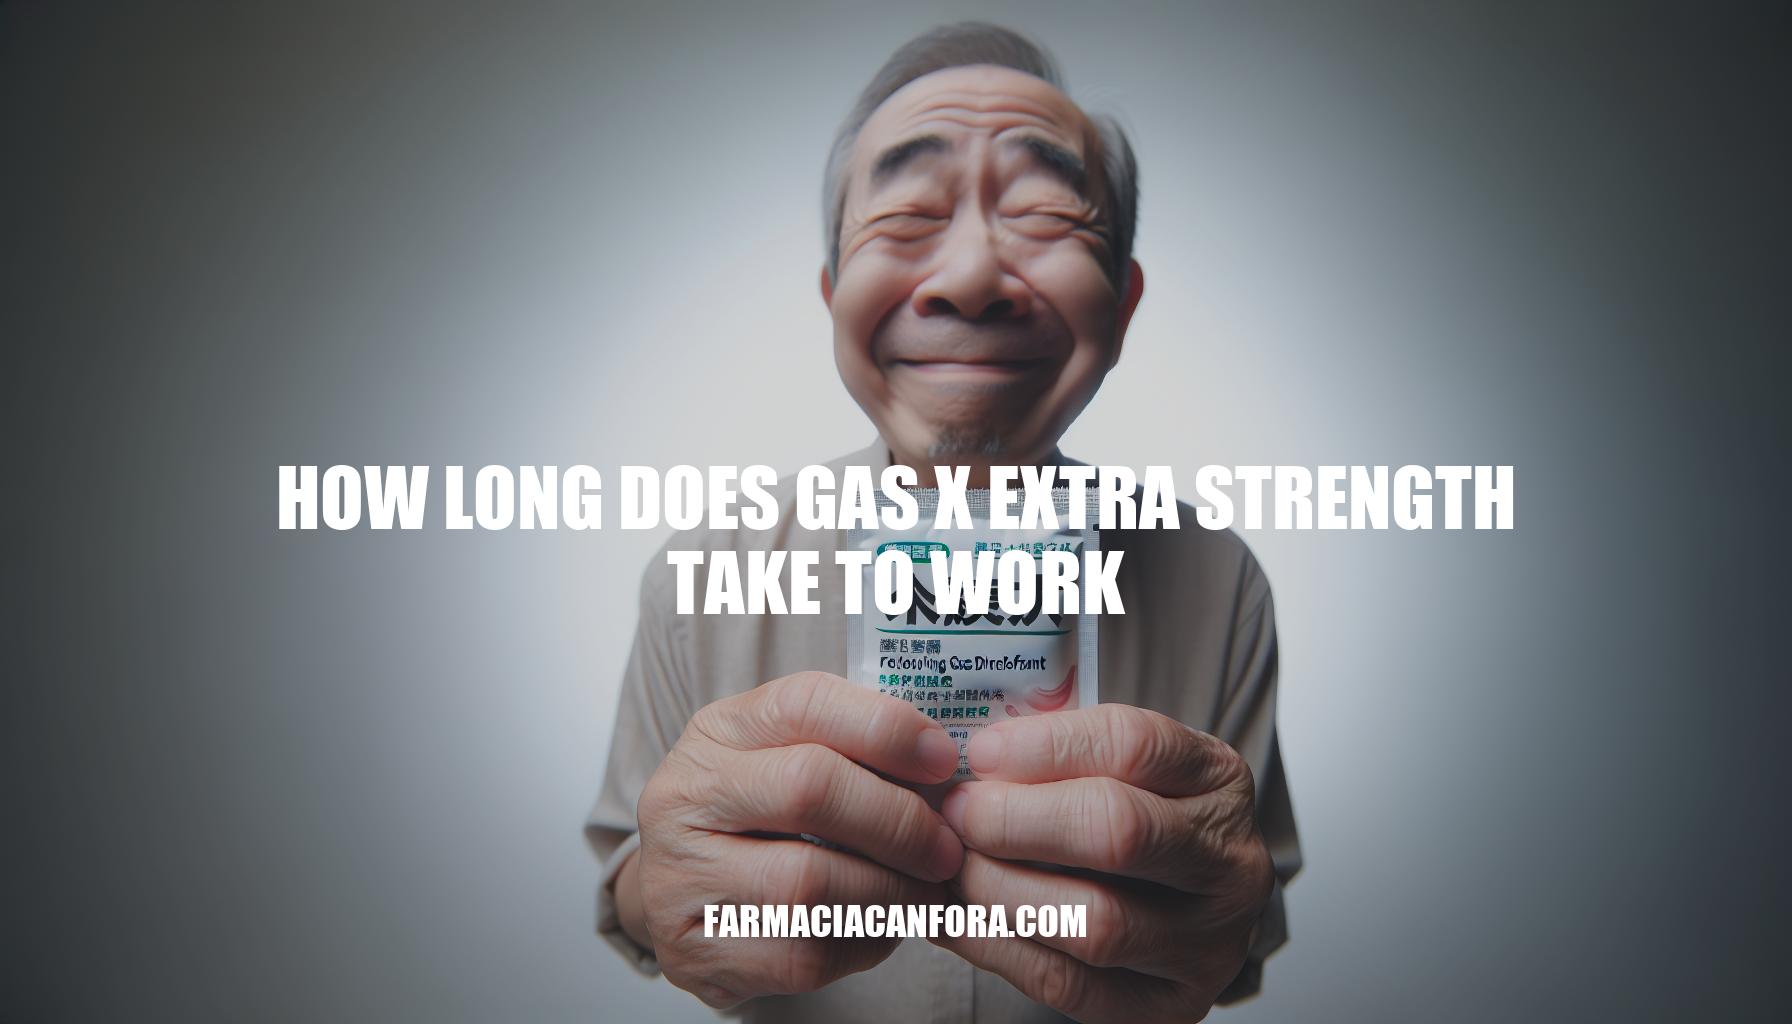 How Long Does Gas-X Extra Strength Take to Work